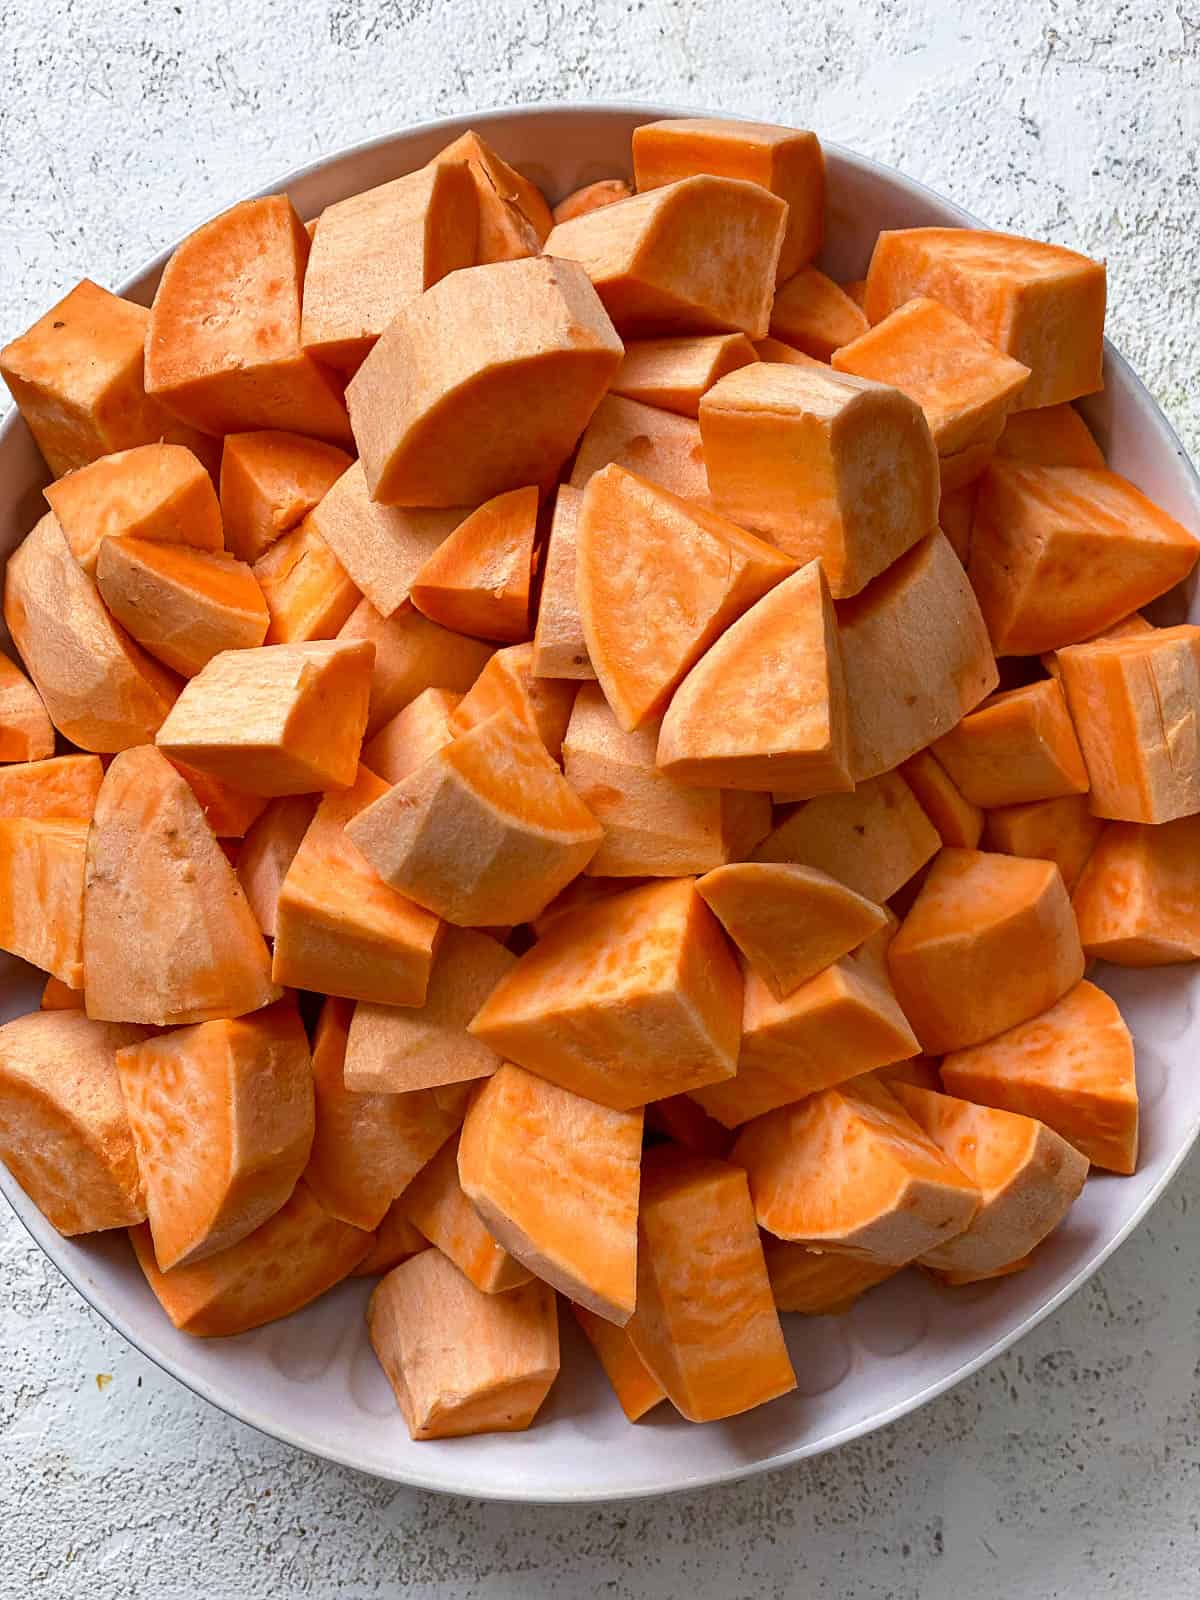 Bowl of raw chopped and peeled sweet potatoes in a white bowl on a textured white surface.